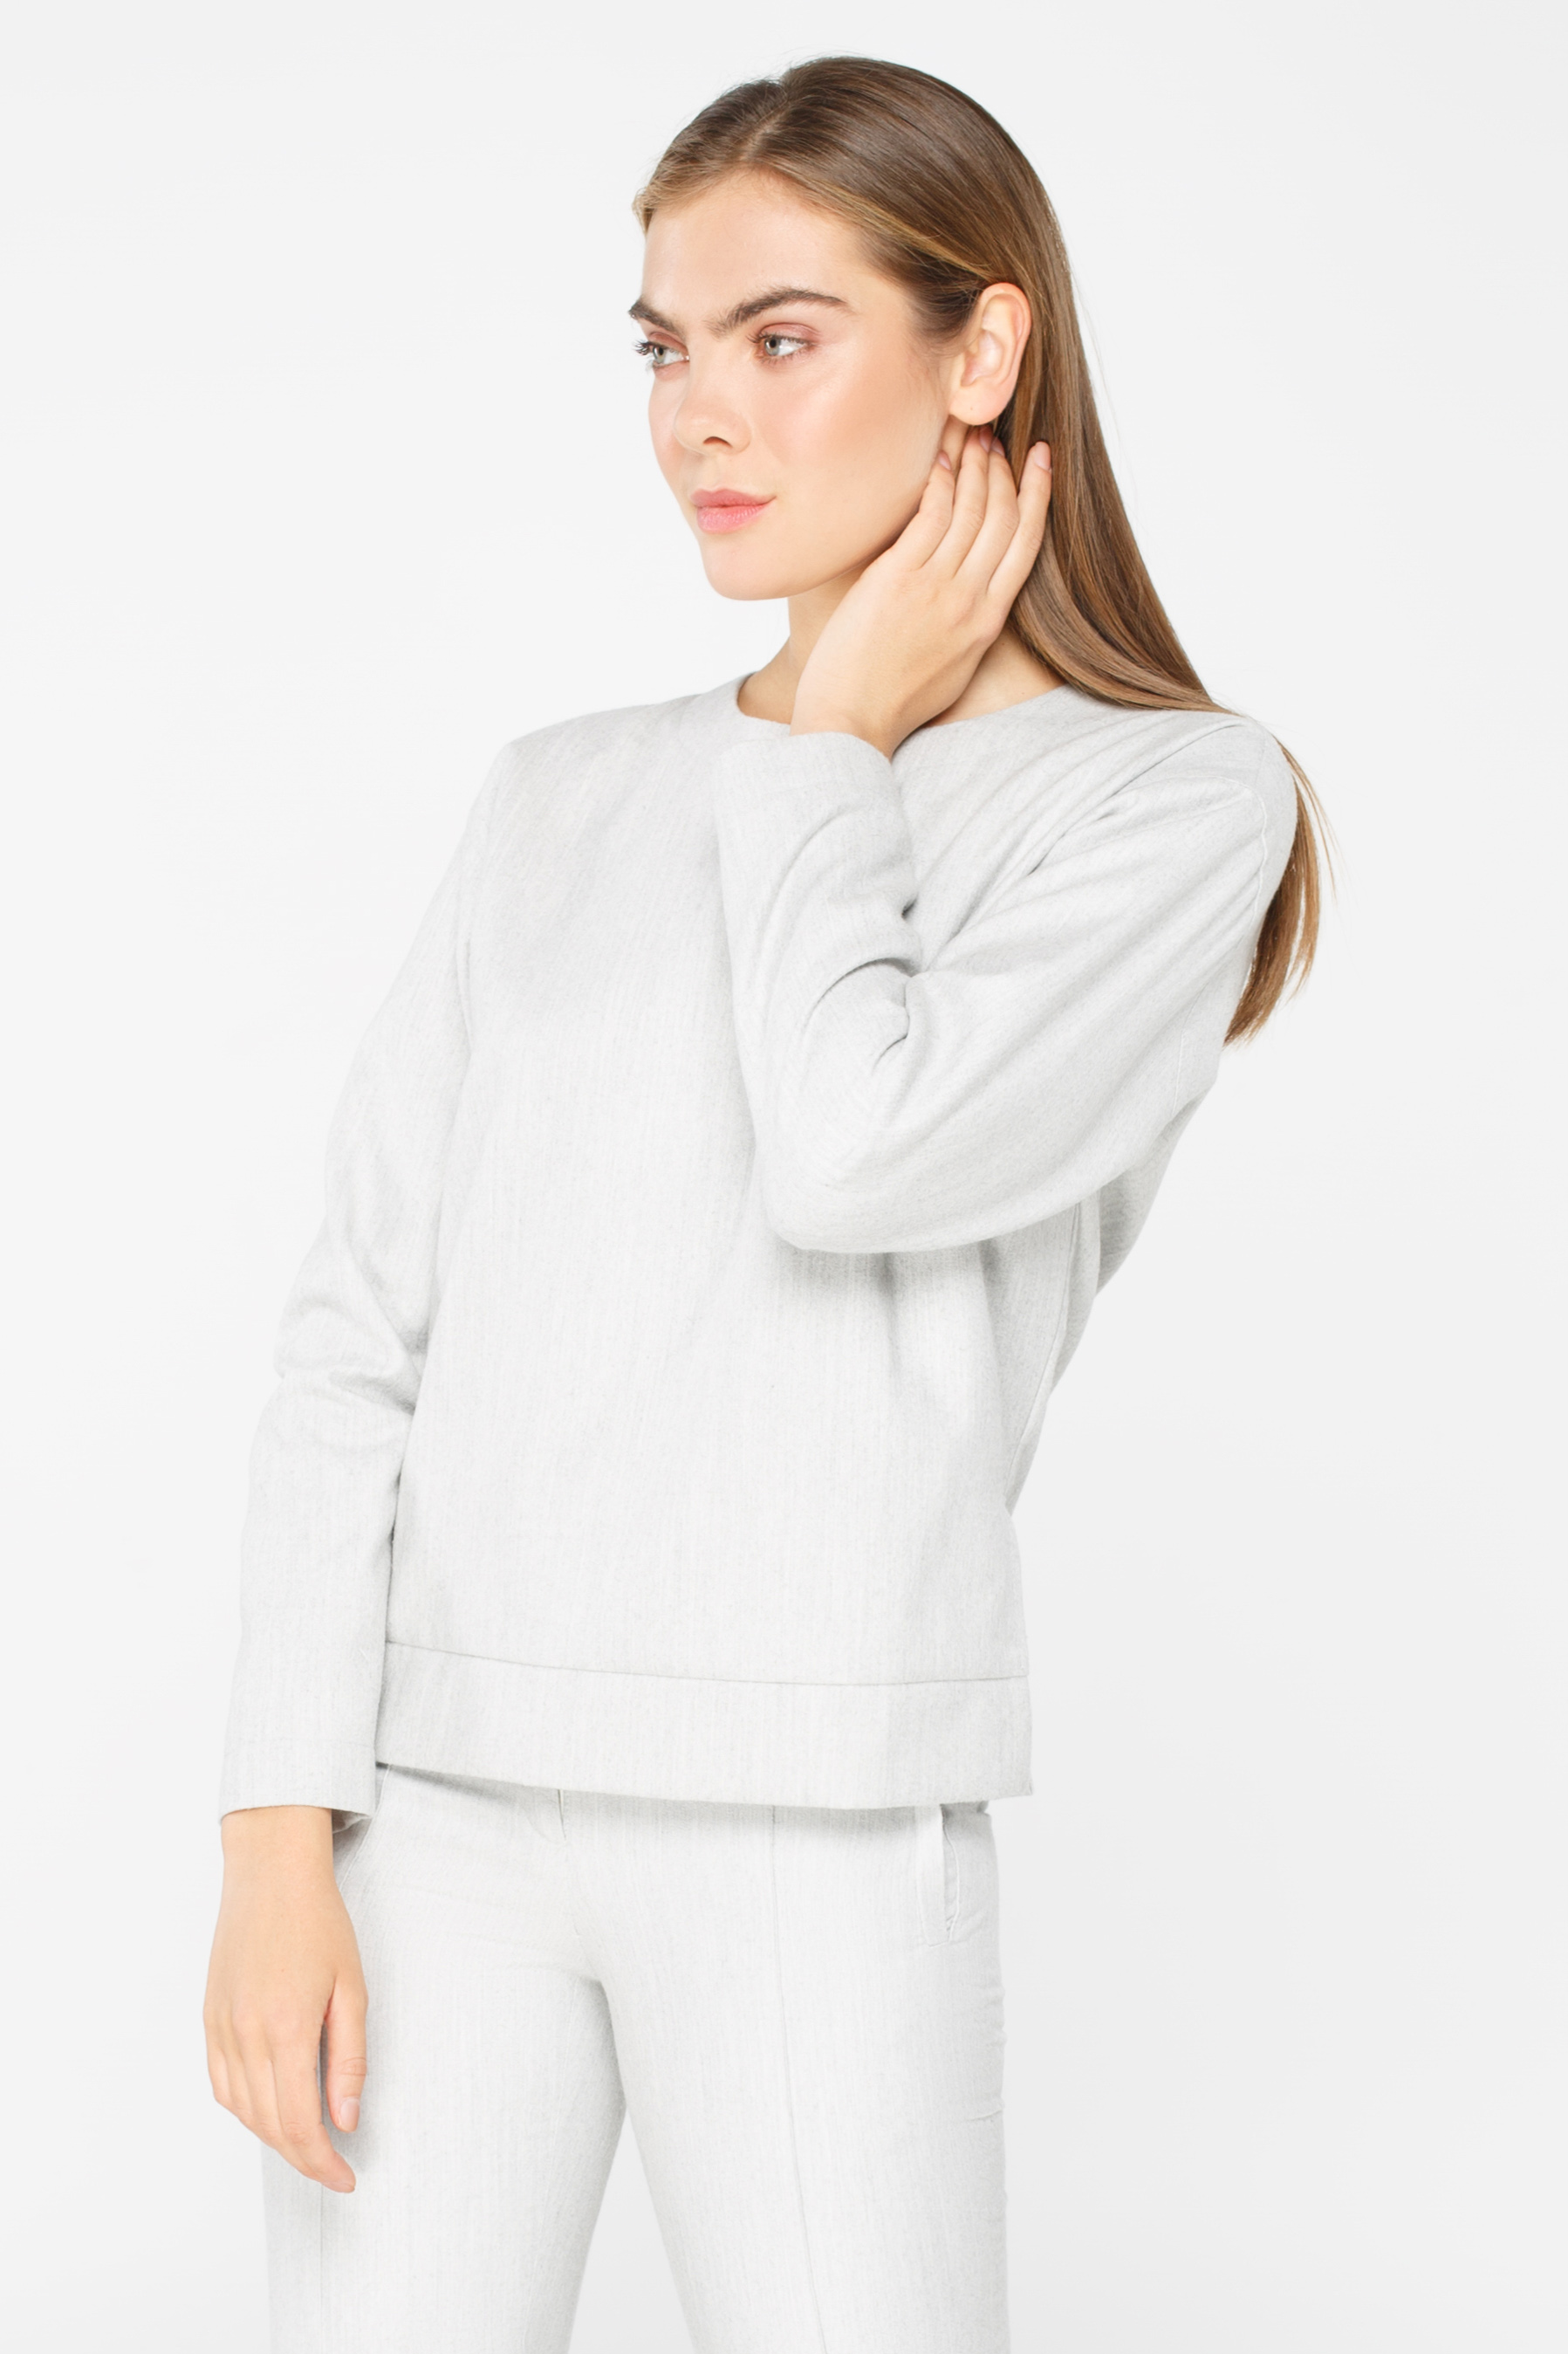 Grey loose-fitting sweatshirt with vents, photo 5